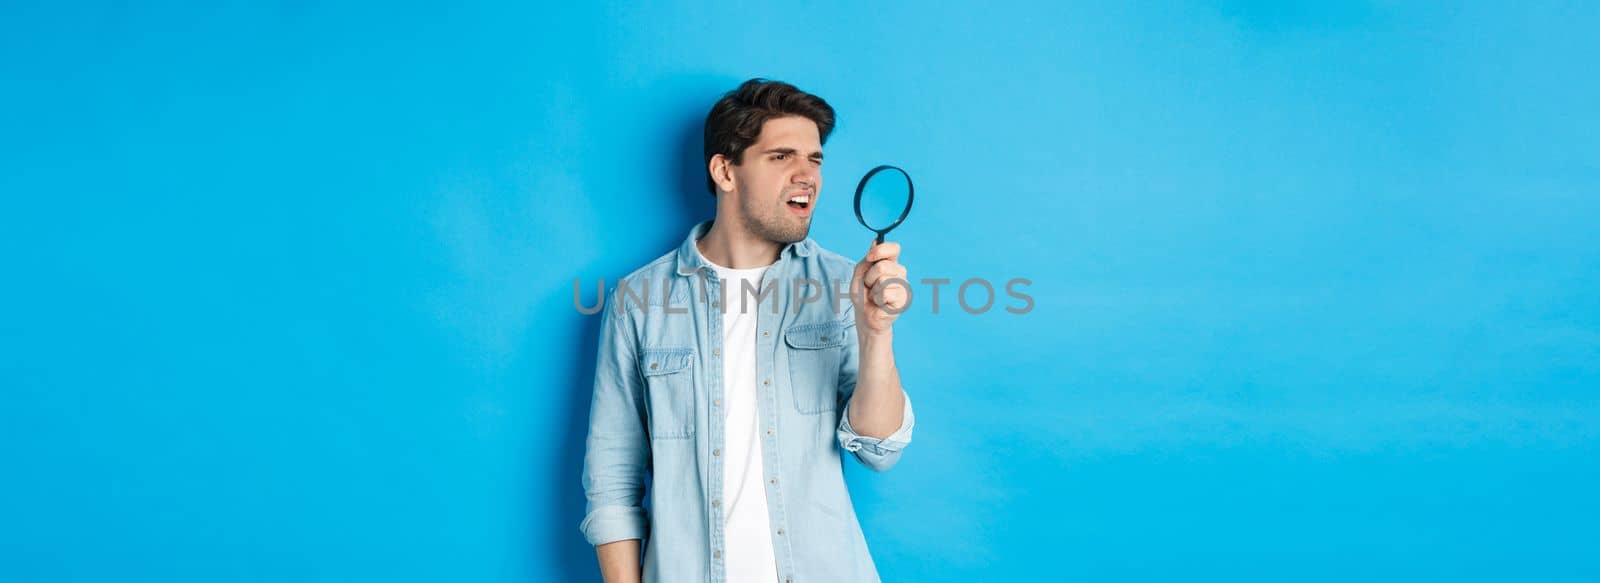 Young thoughtful guy looking through magnifying glass, reading something tiny, standing over blue background.